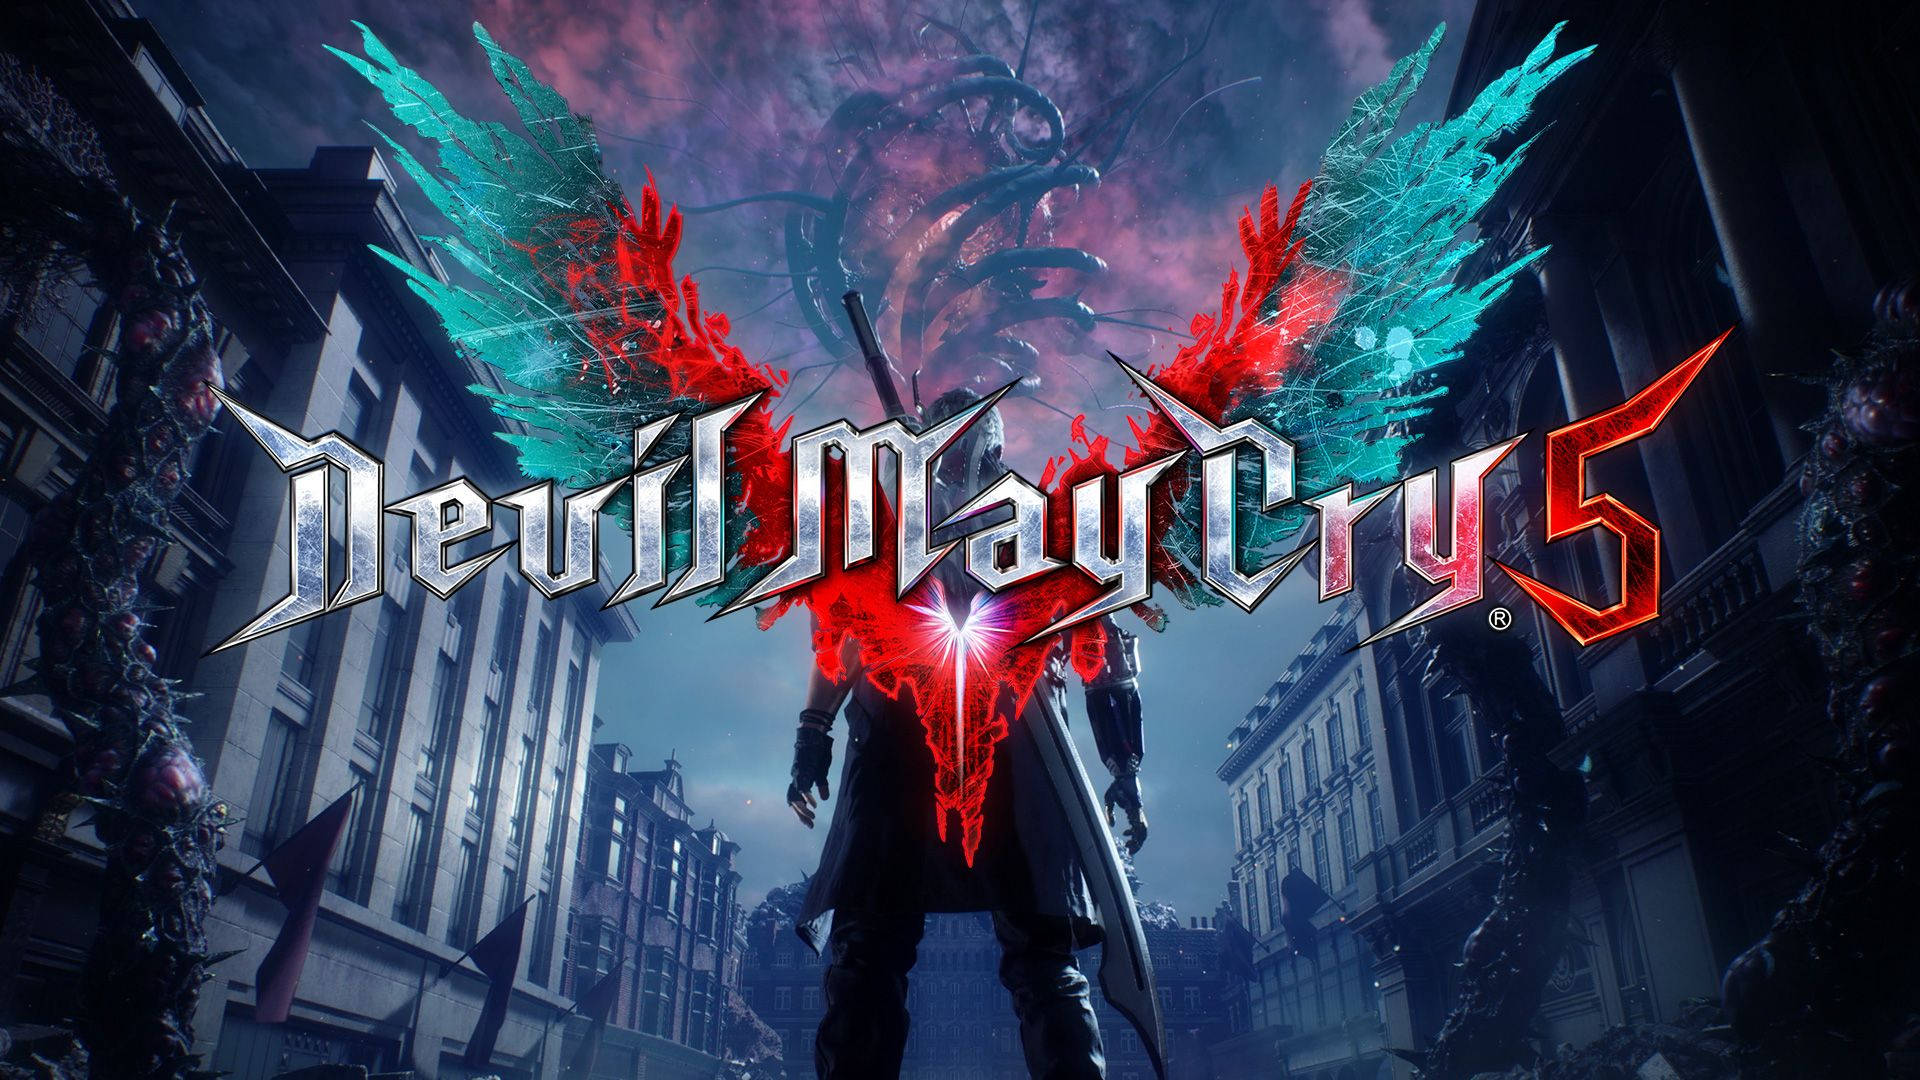 Free Devil May Cry 5 Wallpaper Downloads, [100+] Devil May Cry 5 Wallpapers  for FREE 